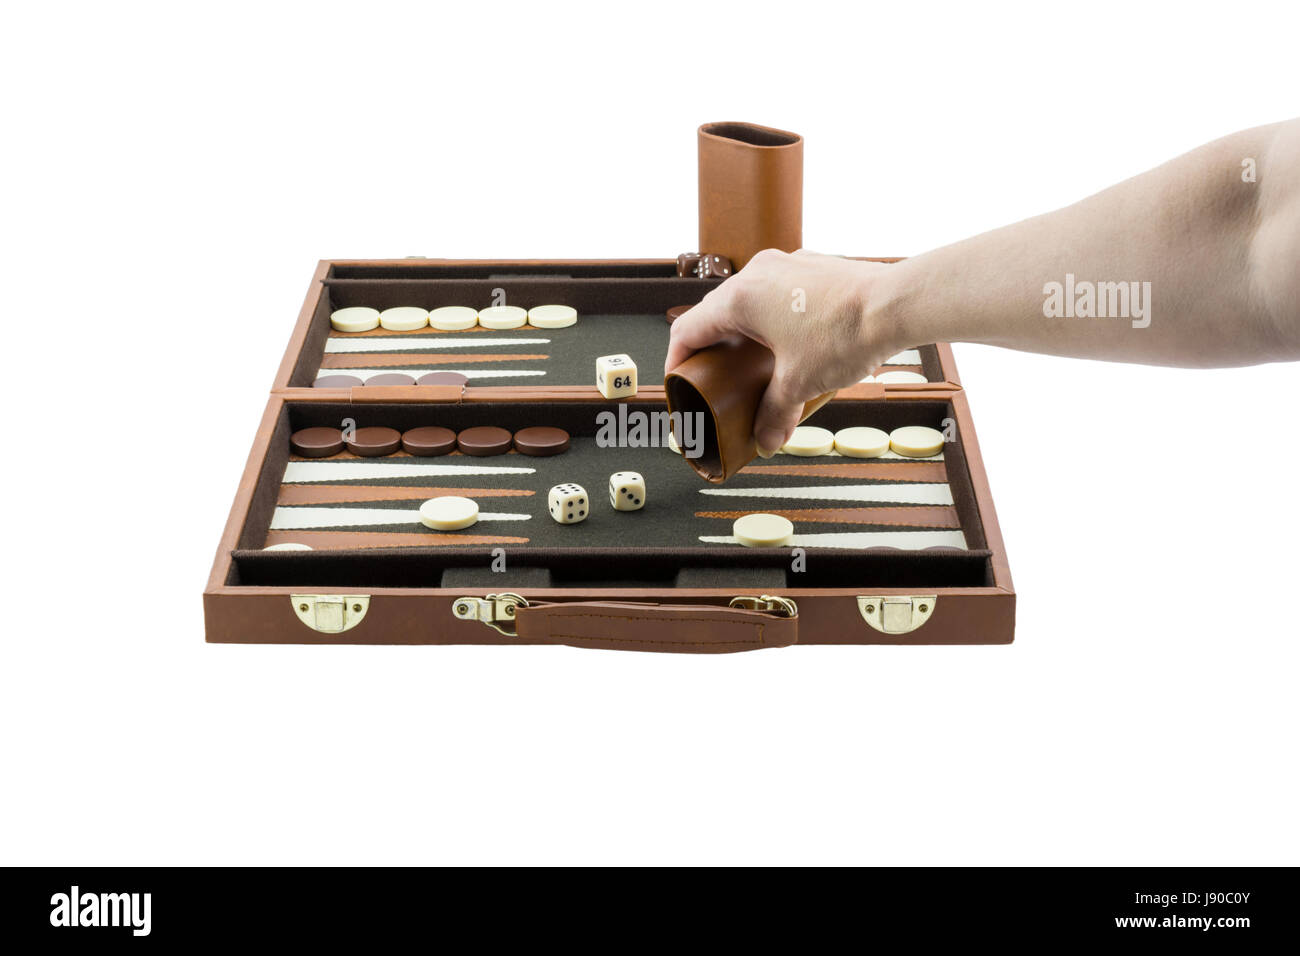 A woman's arm playing backgammon by throwing the die on the backgammon board with her righ hand. Isolated on a pure white background. Stock Photo